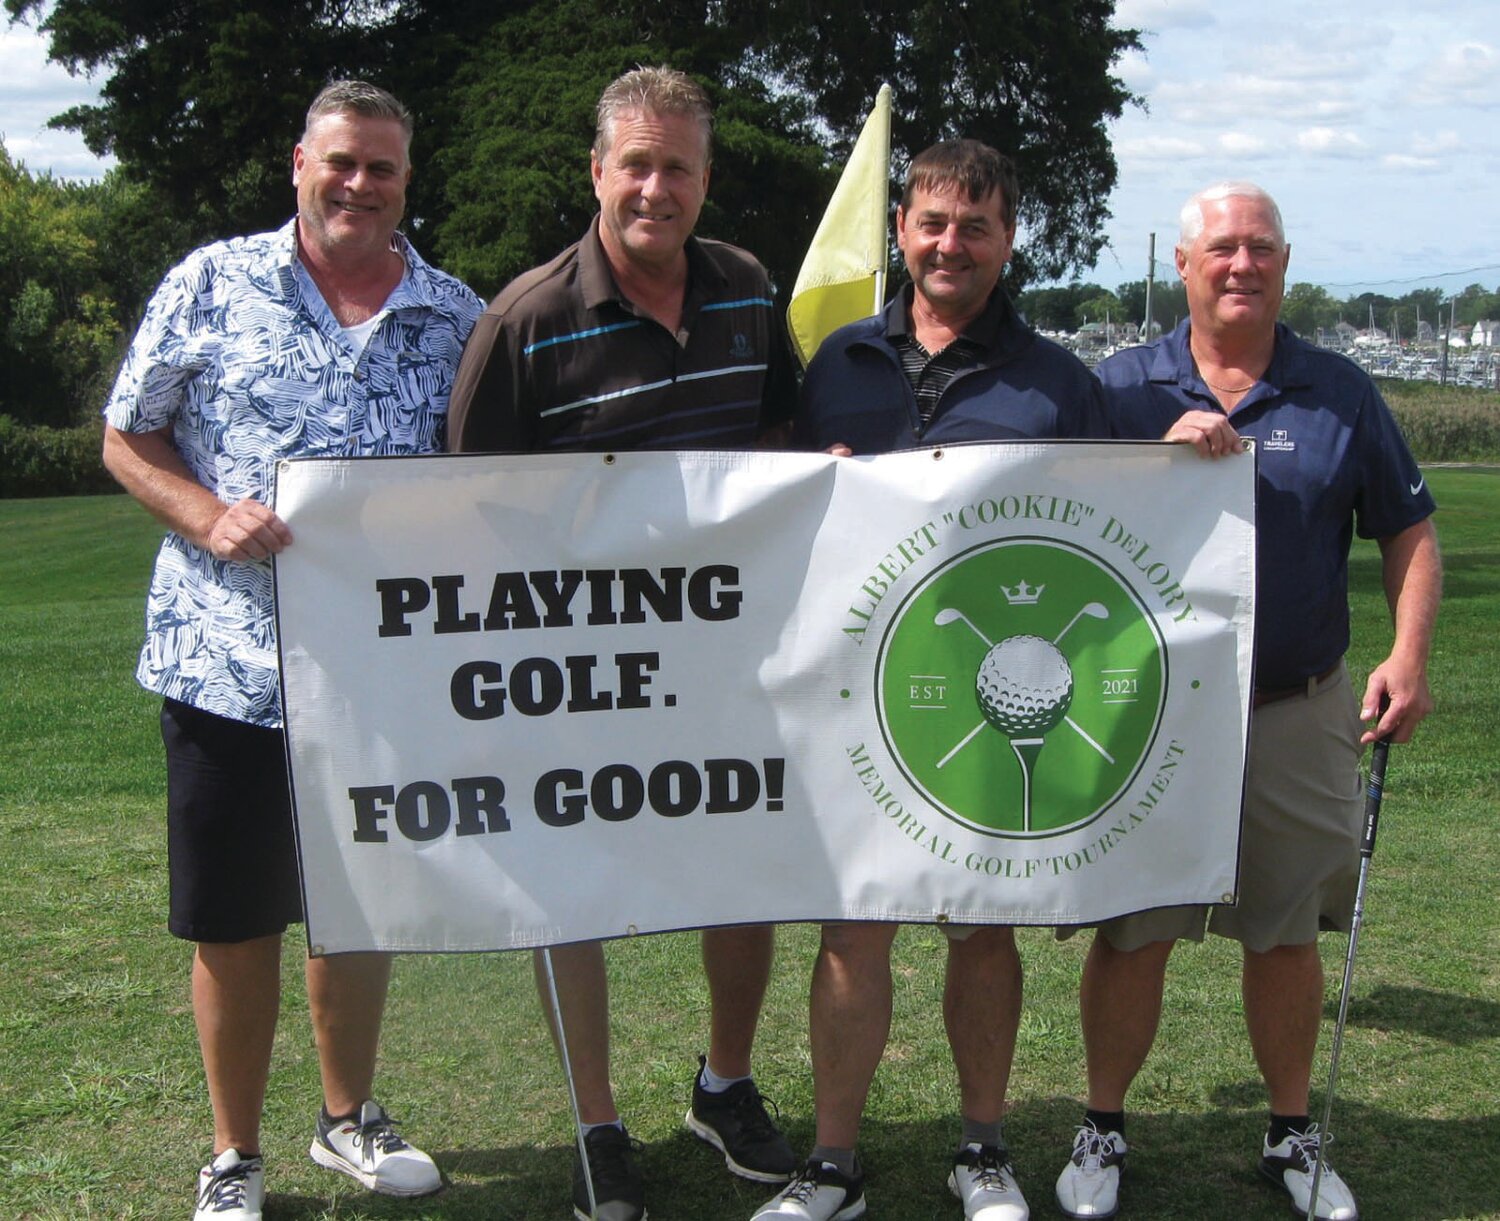 CHAMPS CORNER: The foursome of Buddy Lamphere, Tom Forte, Bill Cilley and Bob Campbell captured top honors in Friday’s 3rd Annual Albert “Cookie” DeLory Memorial Golf Tournament. (Photos courtesy of Dick Warner)